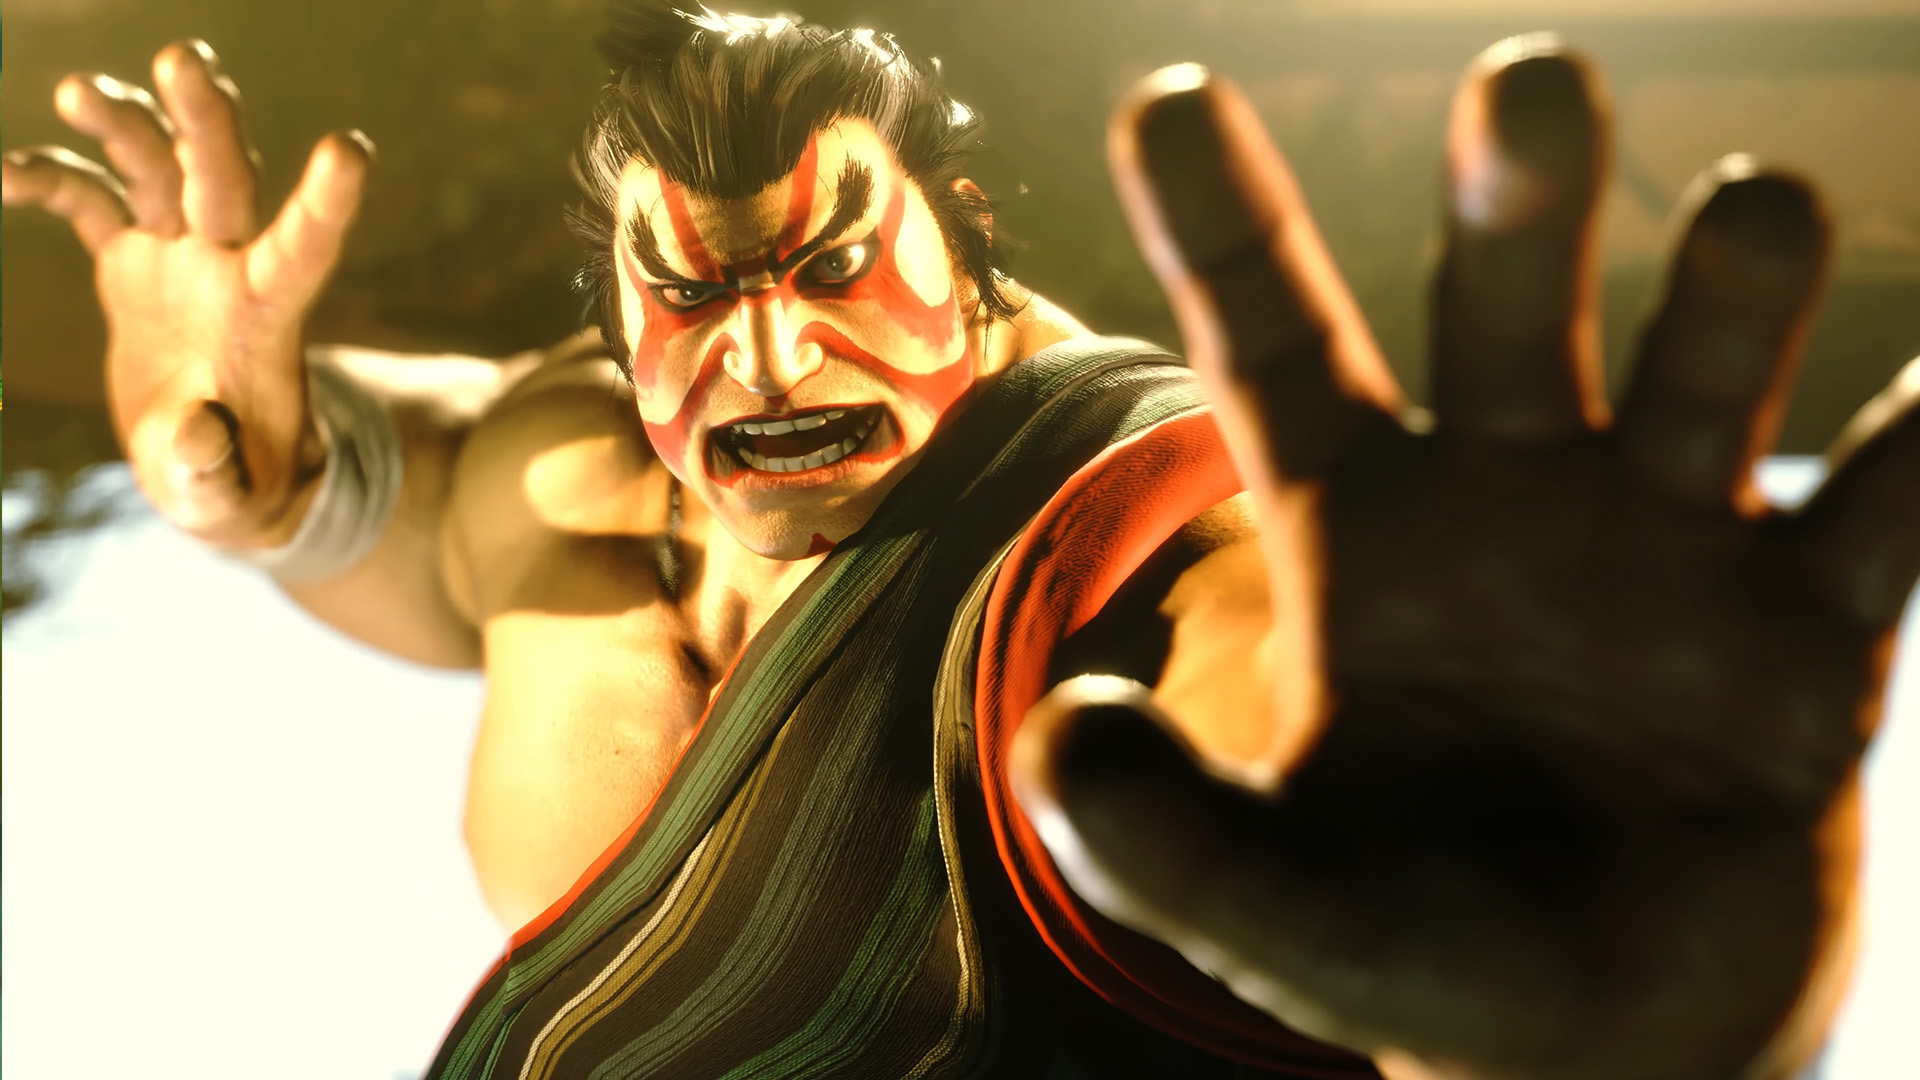 Hands-on with 'Street Fighter 6' and Capcom's other TGS demo lineups